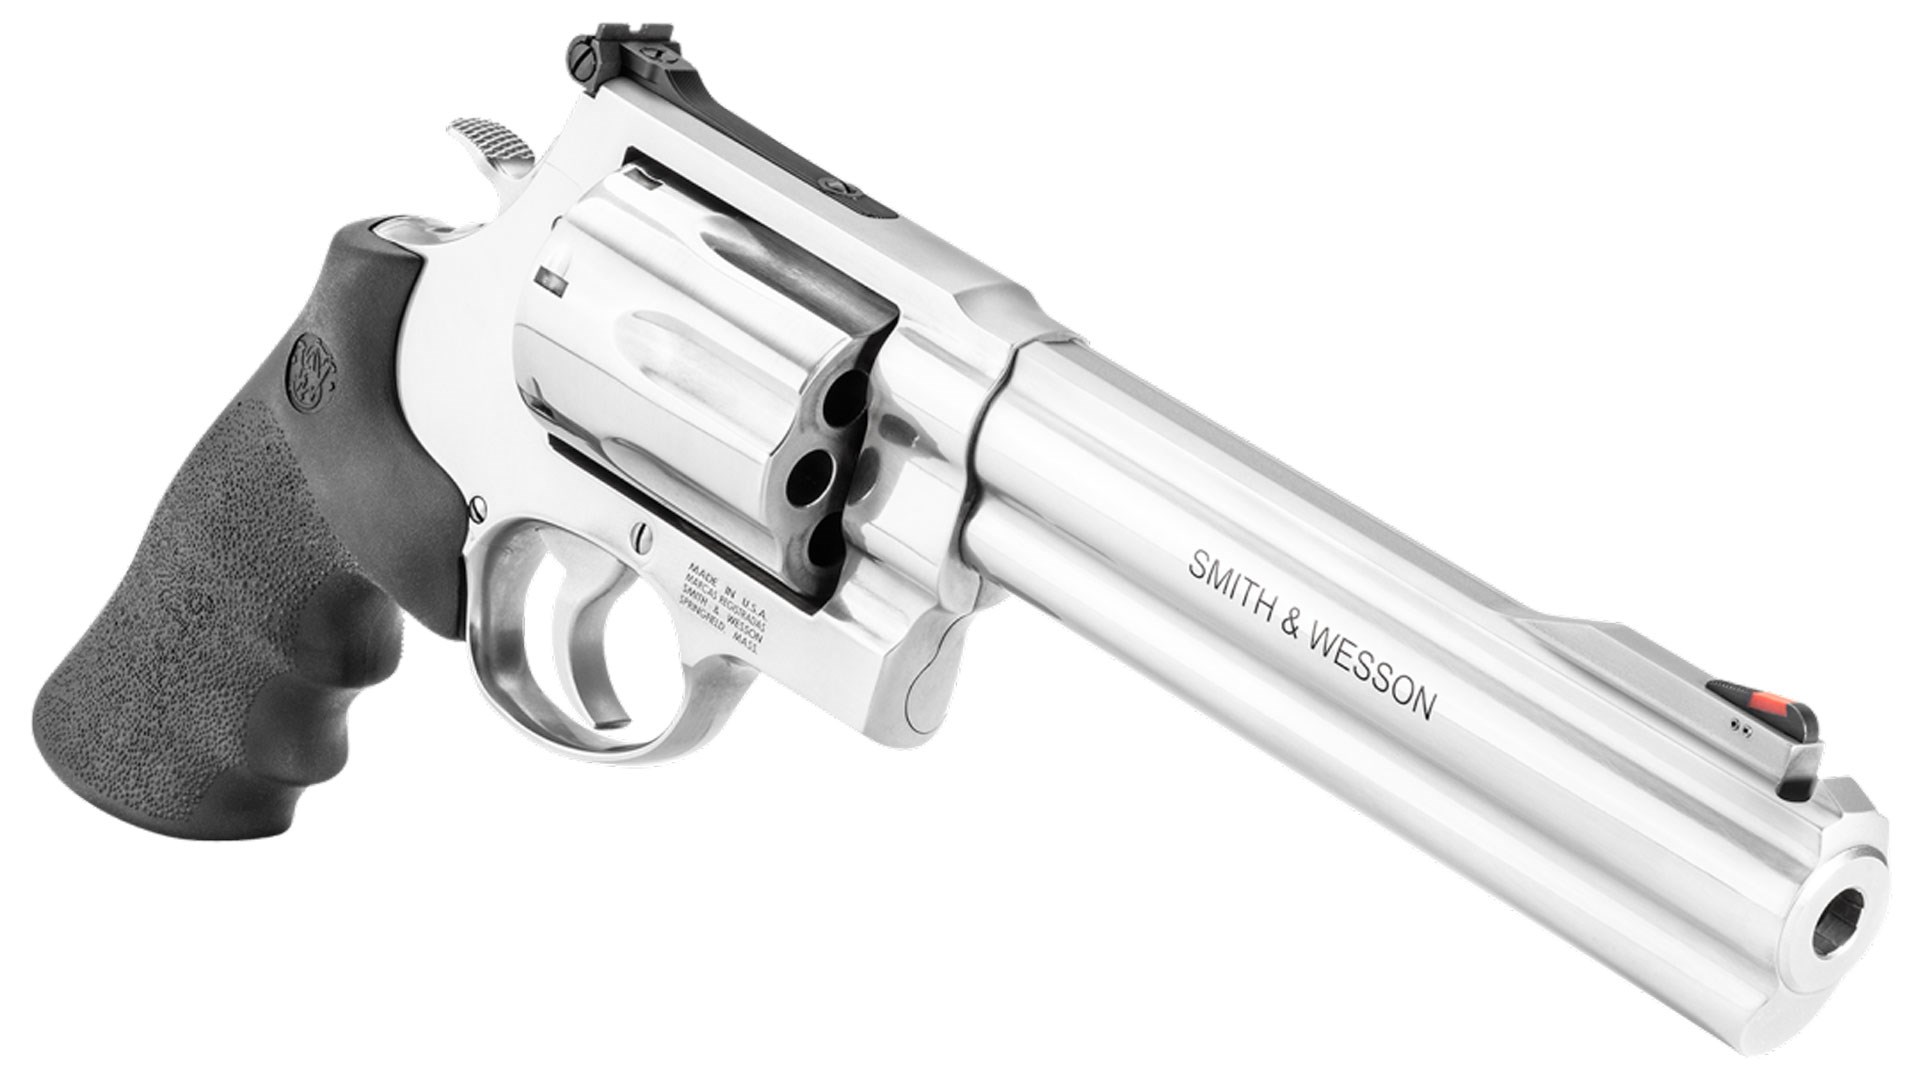 Smith and Wesson 350 on White